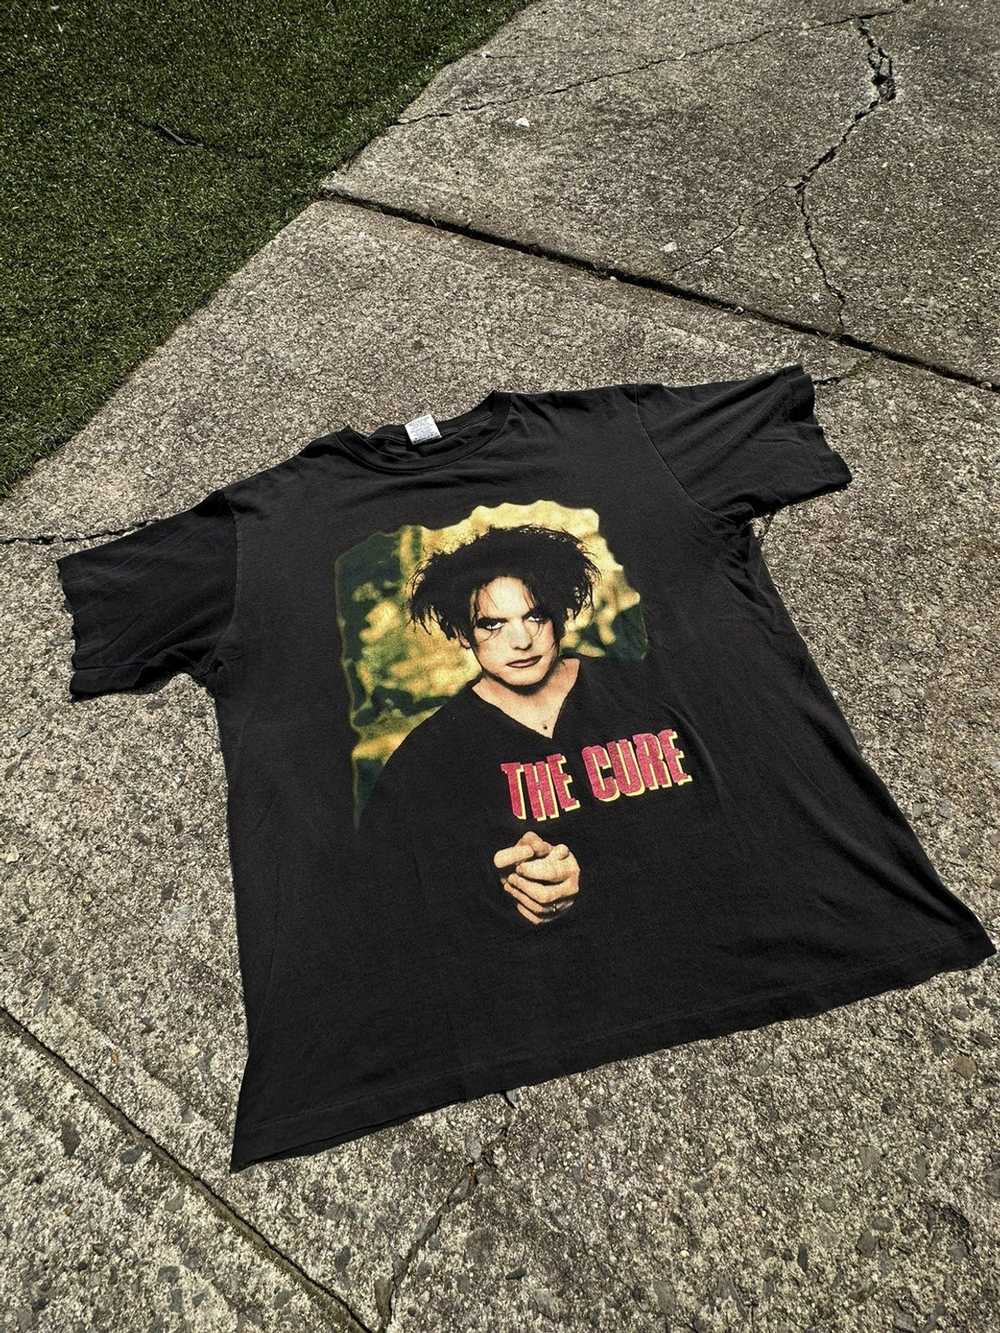 The Cure × Vintage 1996 The cure - image 1